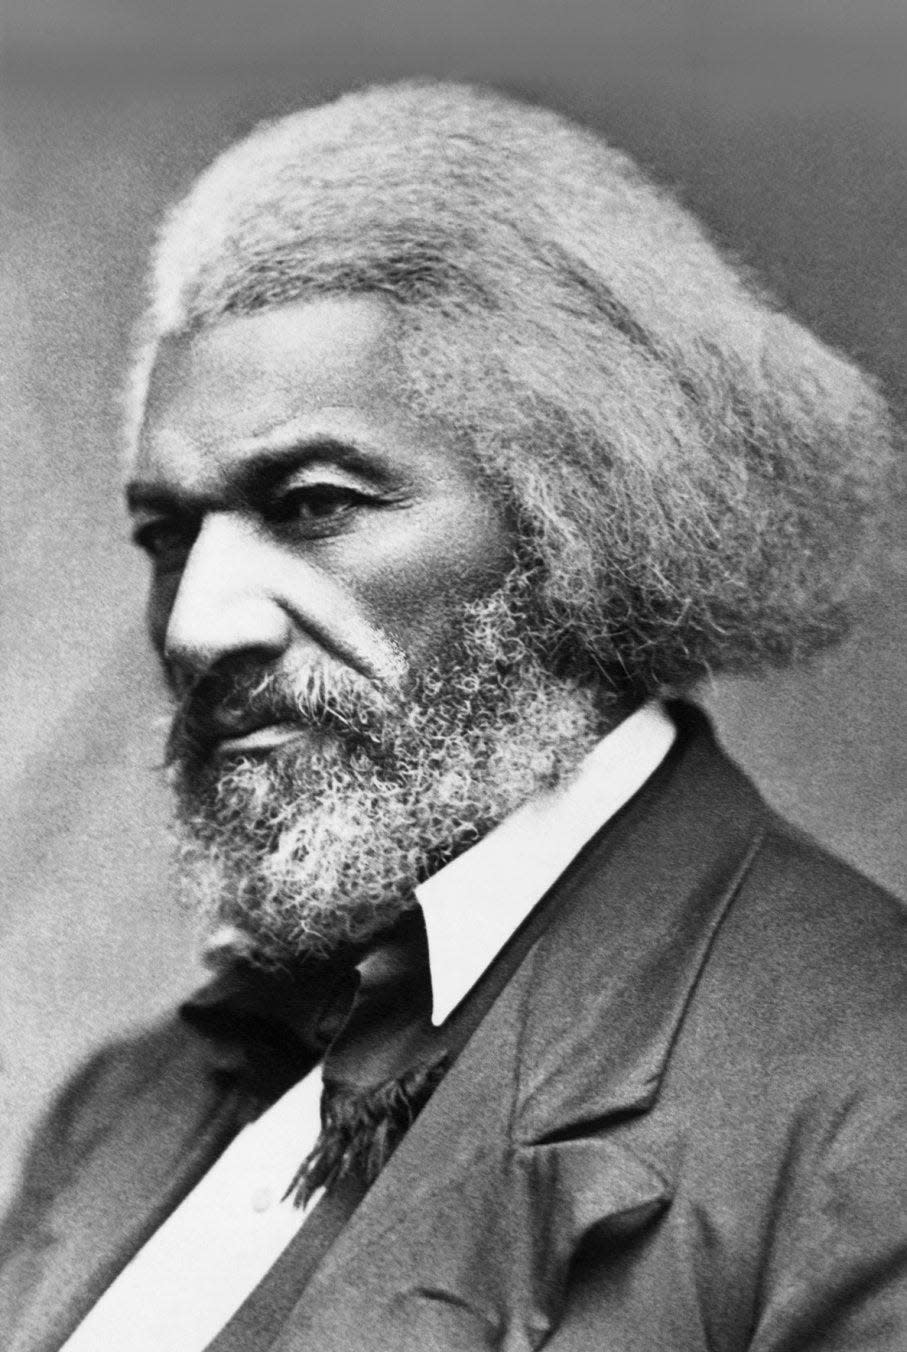 Frederick Douglass visited Richmond for the last time on Sept. 2, 1880, and was applauded by the local populace.